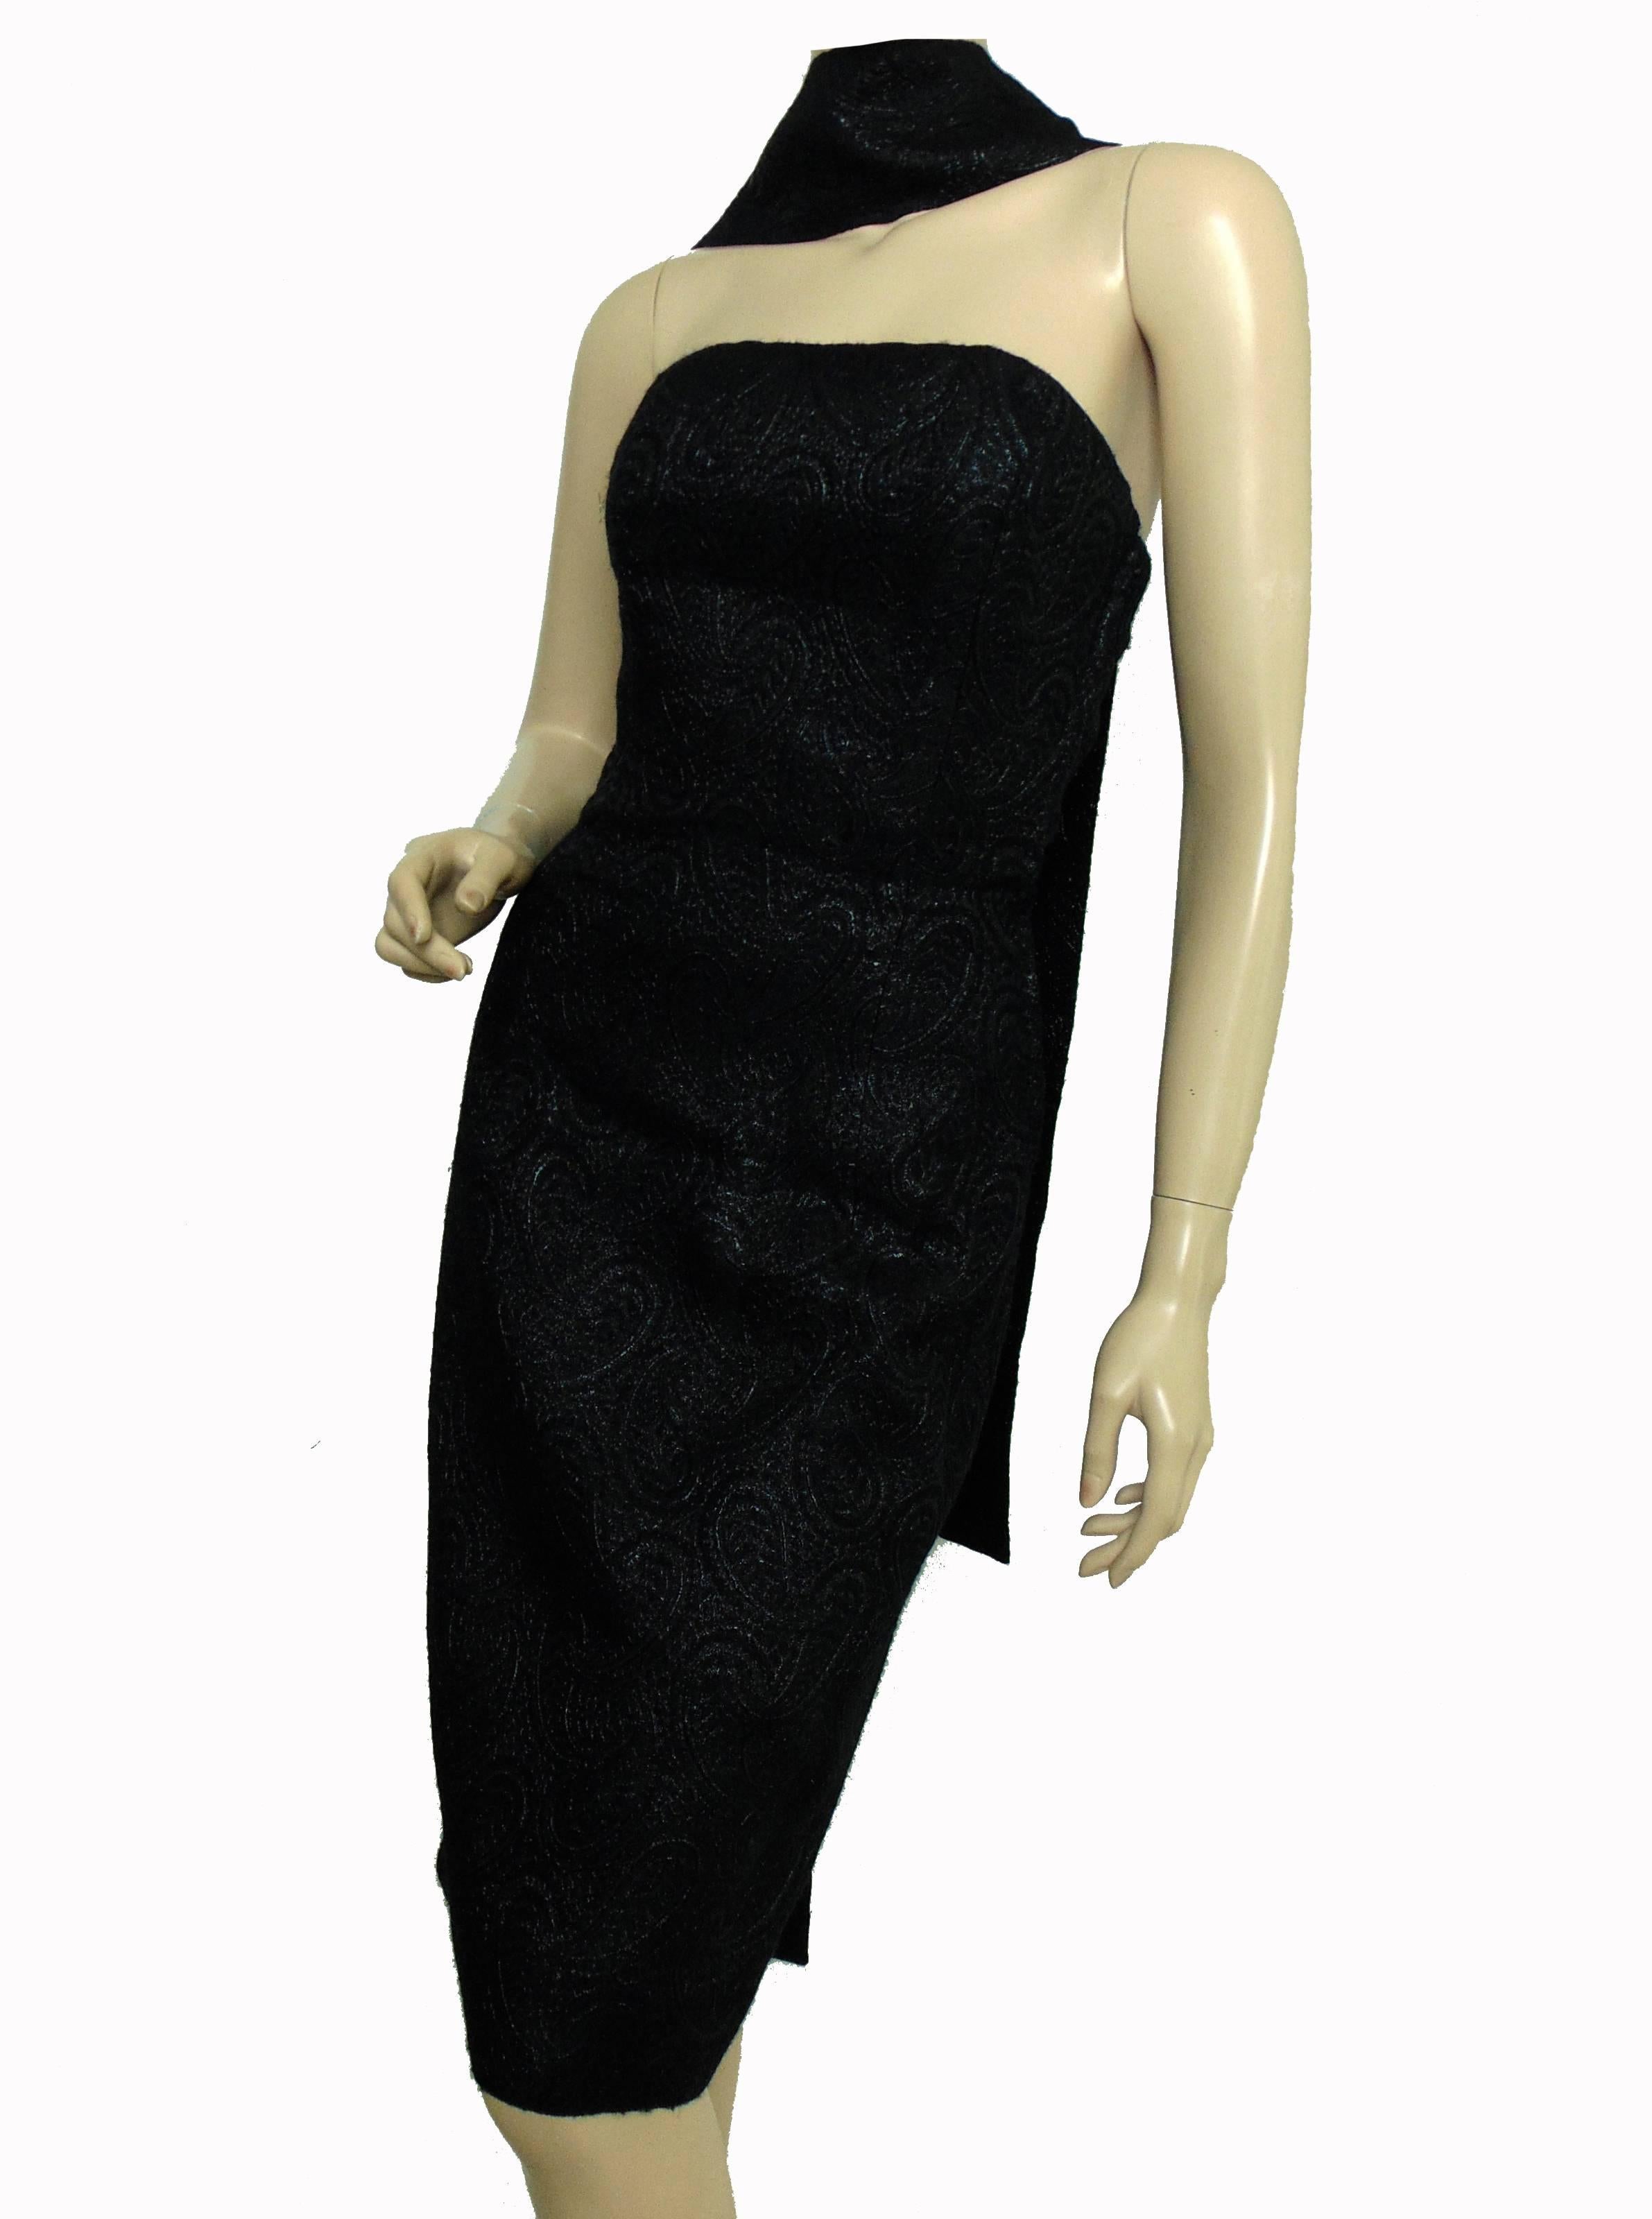 Givenchy Black Cocktail Dress with Wrap or Belt Paisley Lurex Silk, 1960s 4